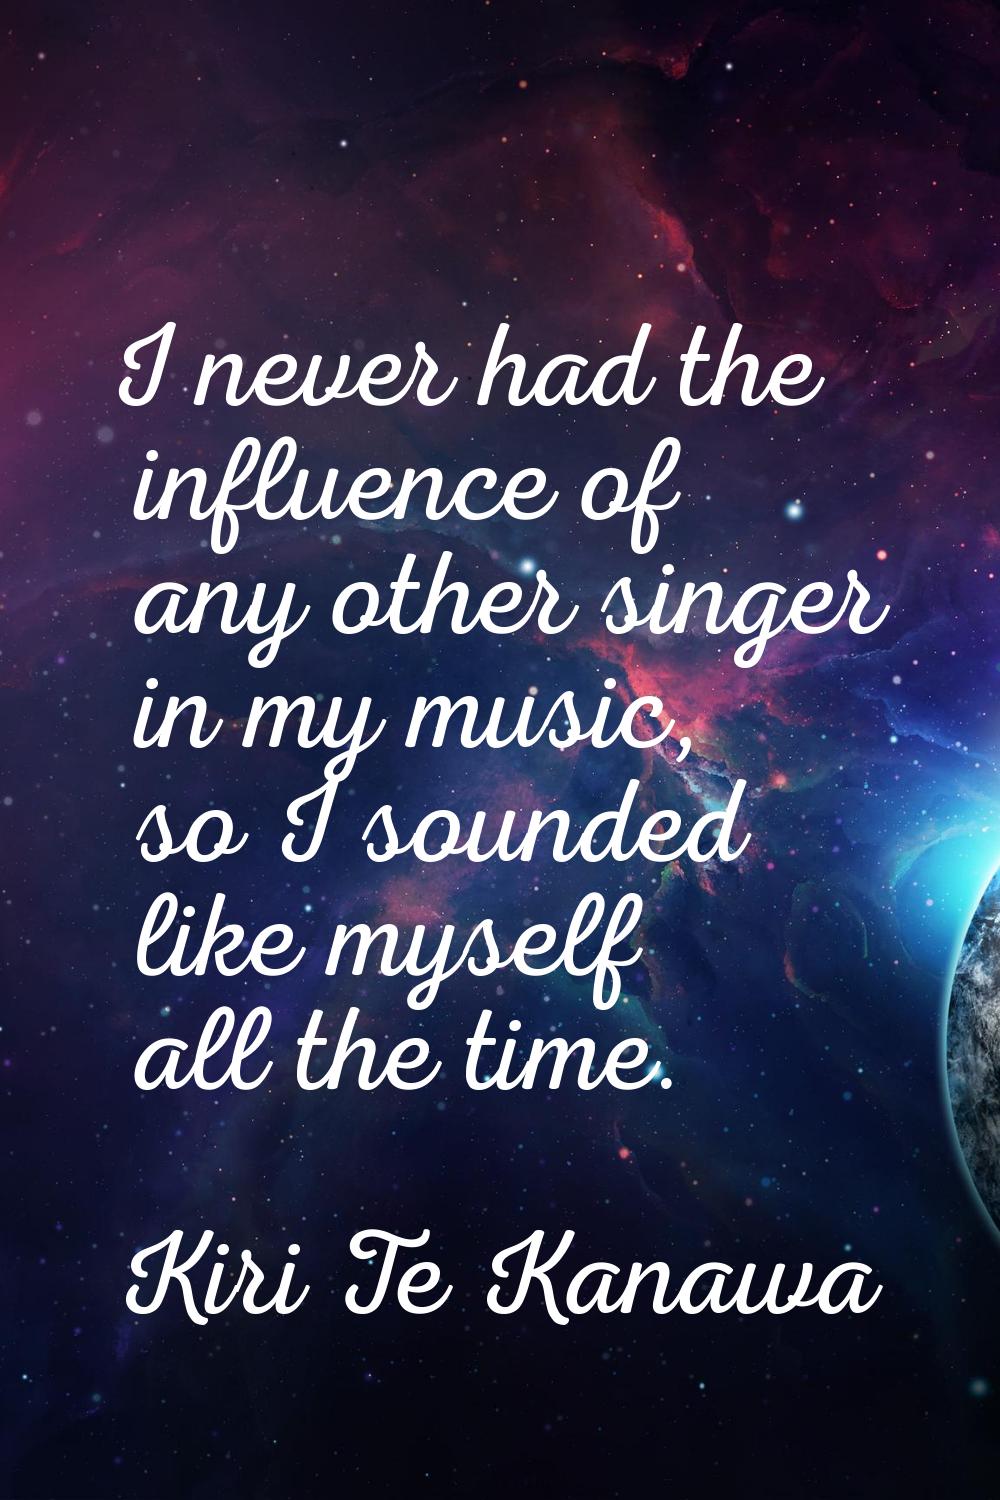 I never had the influence of any other singer in my music, so I sounded like myself all the time.